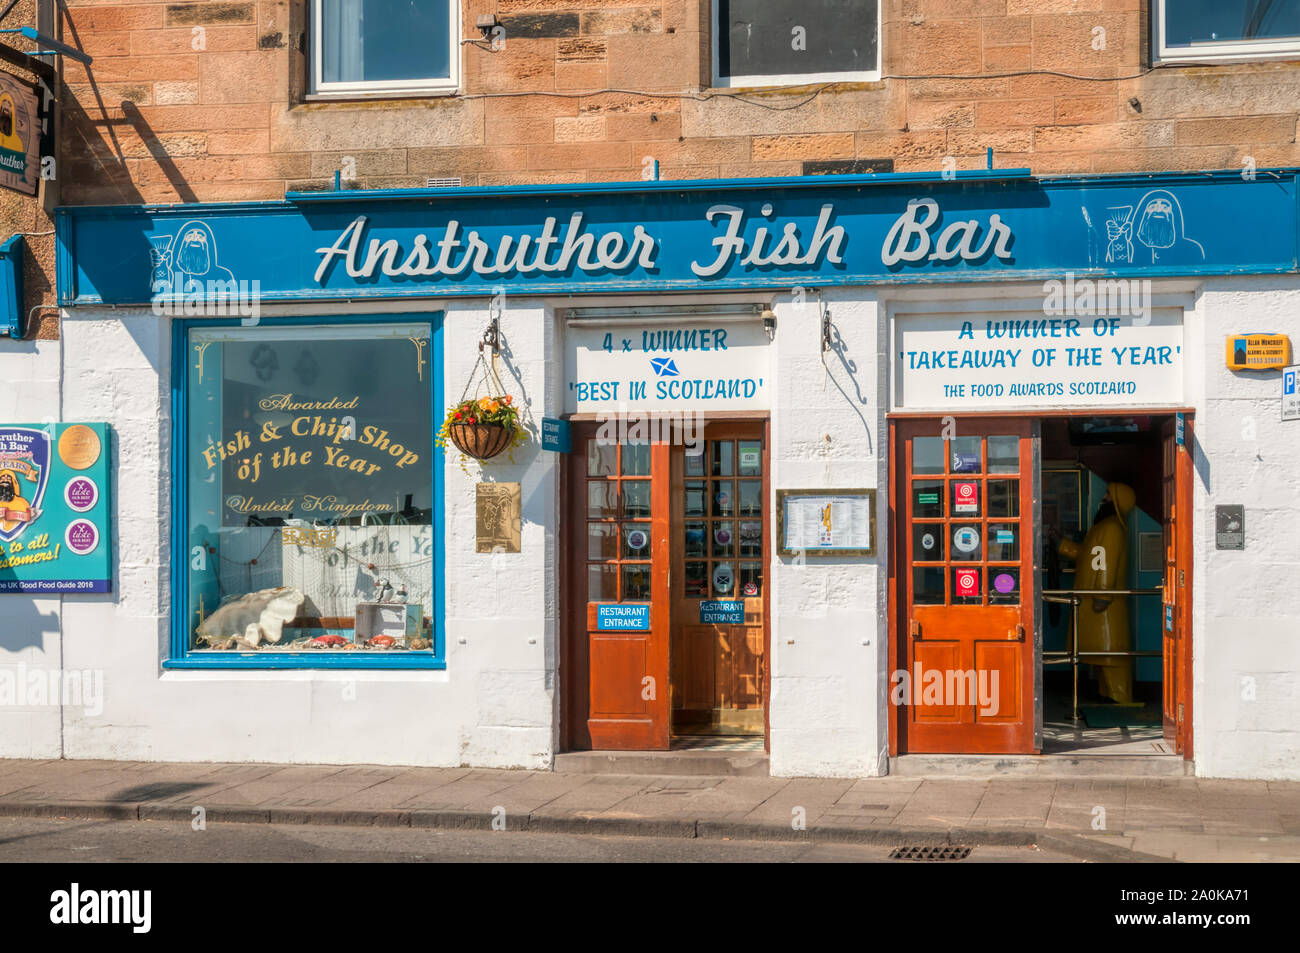 The Anstruther Fish Bar in the East Neuk of Fife, Scotland, was the UK Fish Shop of the Year in 2009. Stock Photo